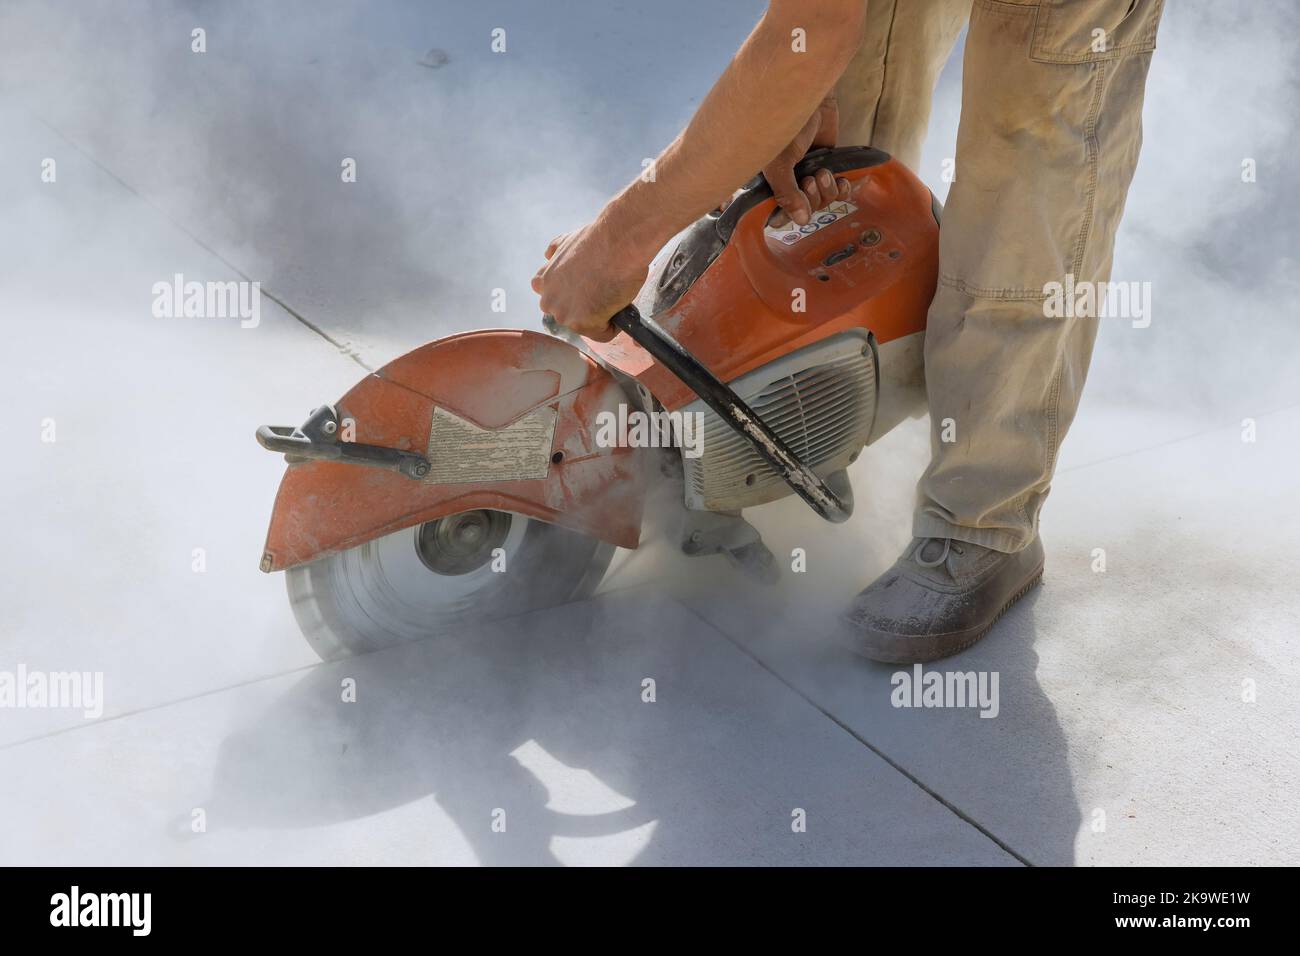 Diamond blade saws are used by construction workers to cut concrete sidewalk Stock Photo